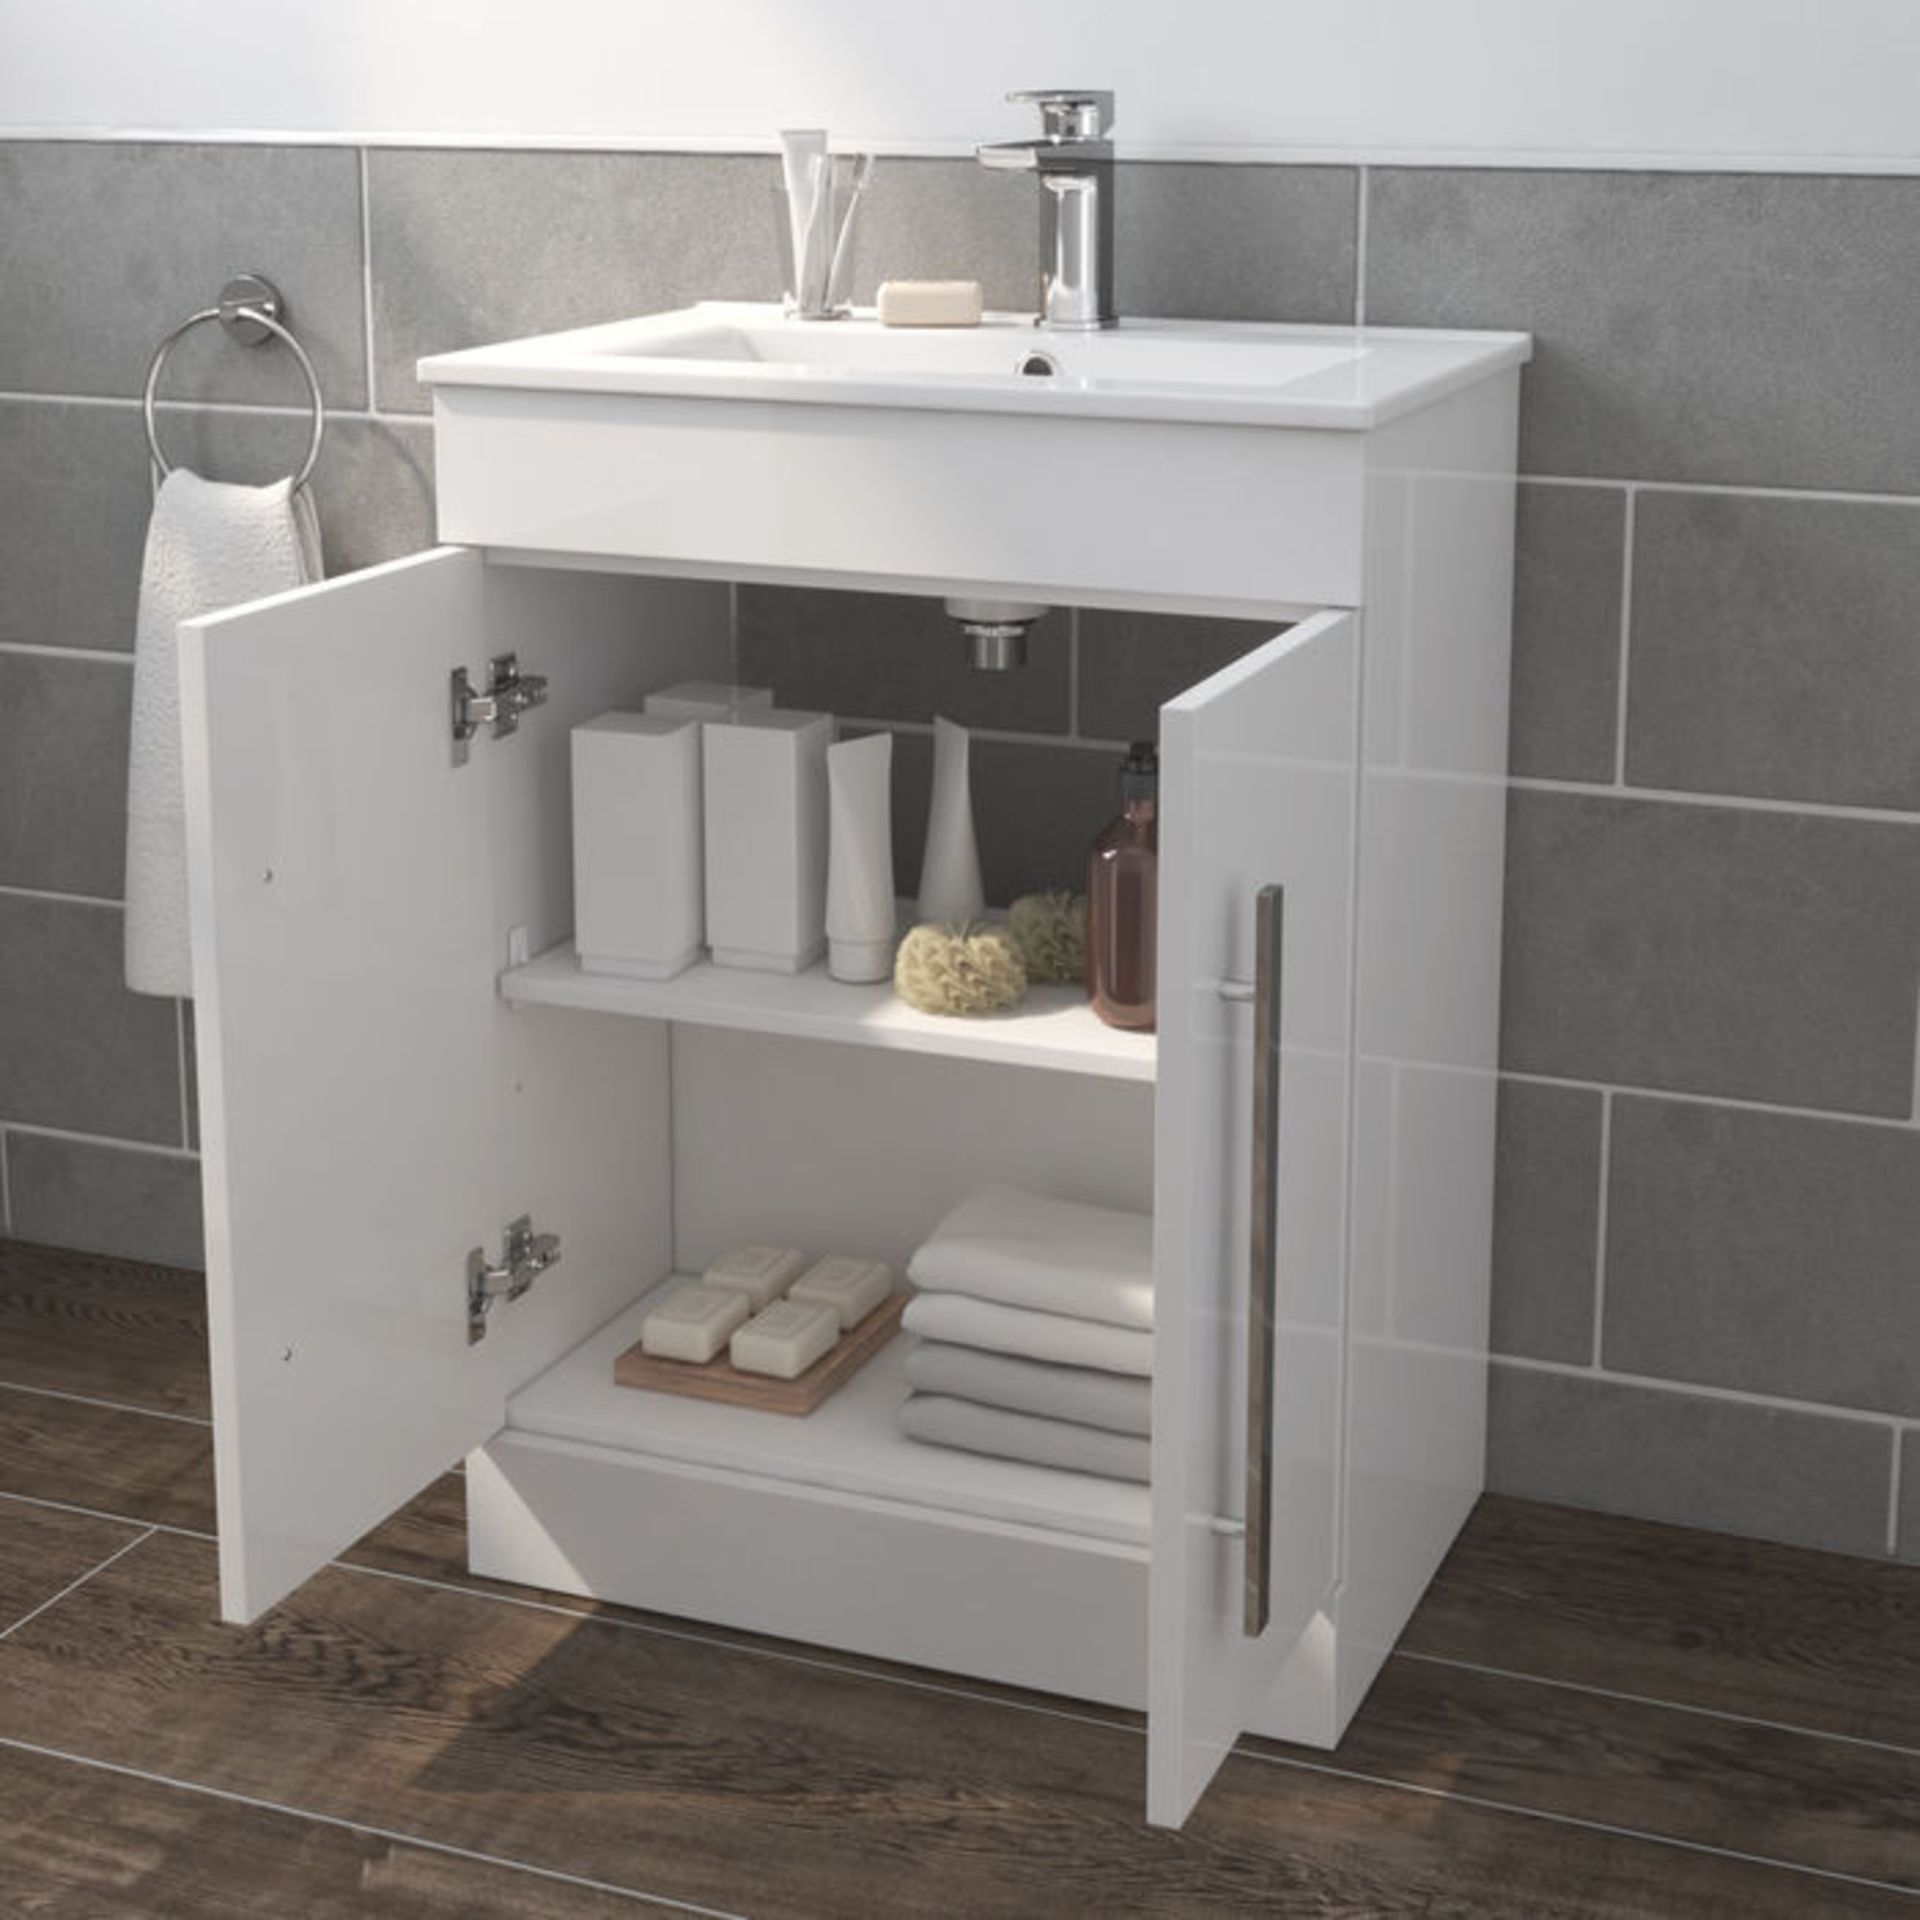 (A67) 600mm Avon High Gloss White Sink Cabinet - Floor Standing. Comes complete with basin. Re... - Image 2 of 5